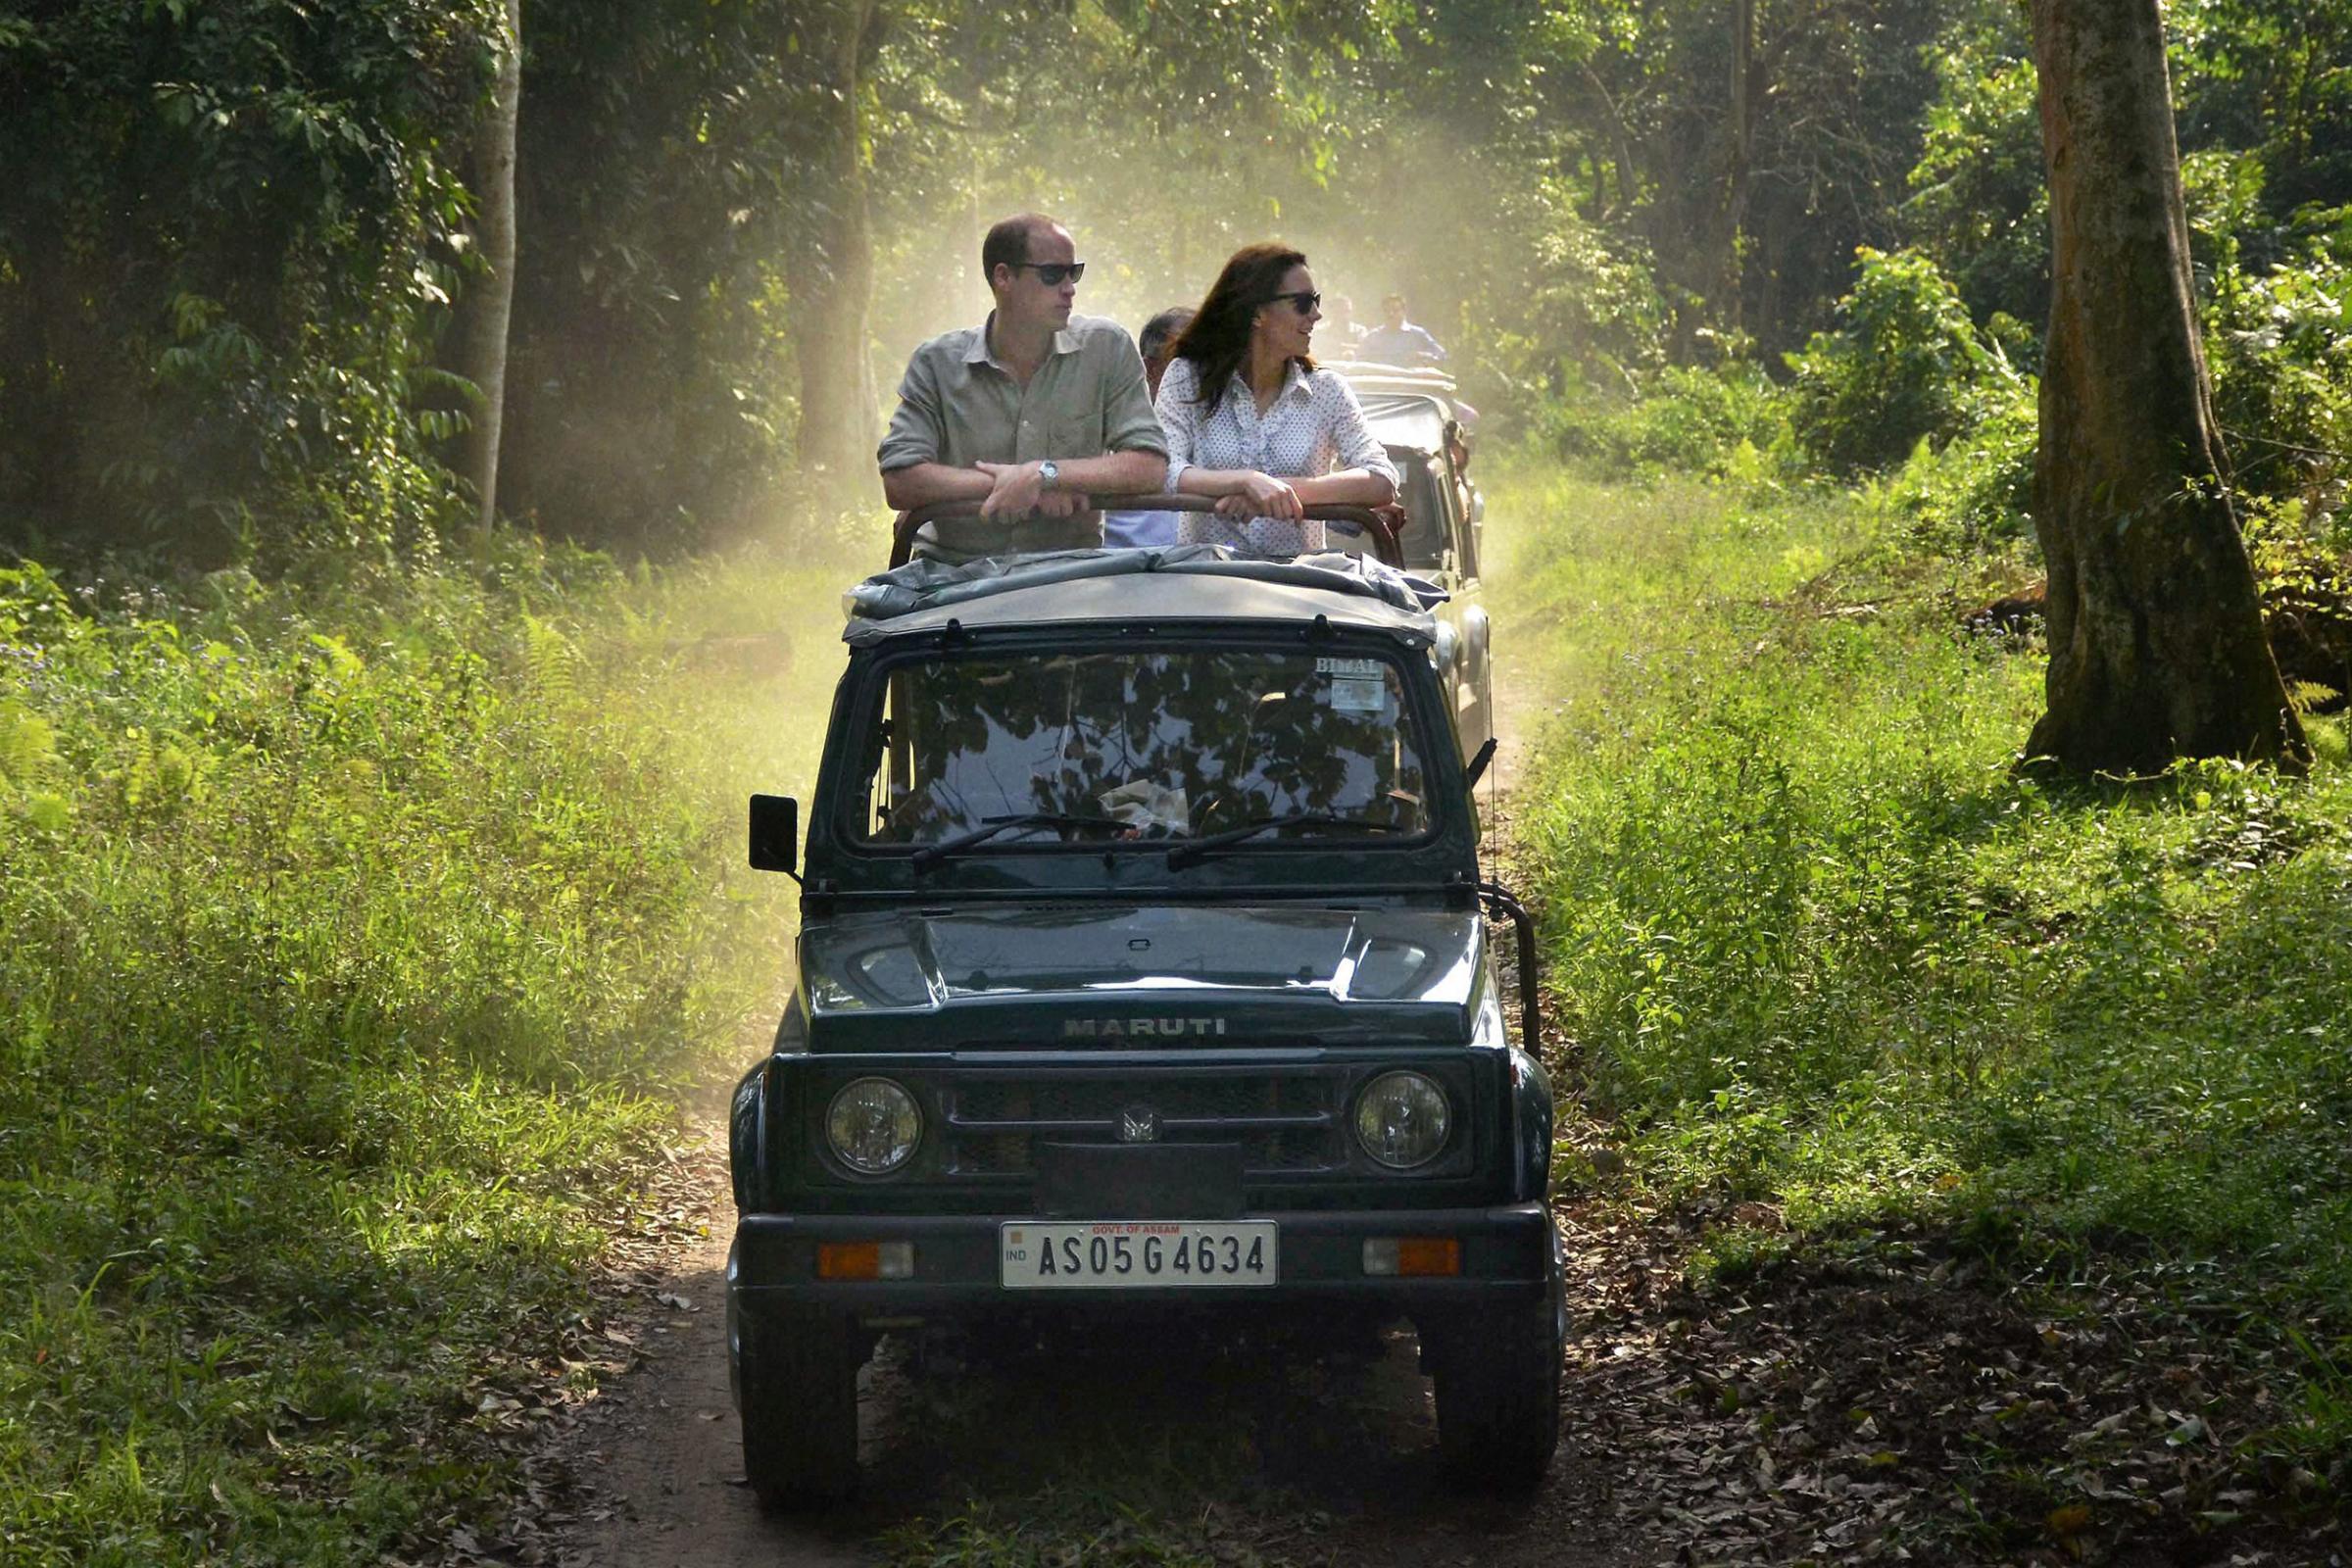 Prince William and Kate, the Duchess of Cambridge take an open vehicle safari inside the Kaziranga National Park, east of Gauhati, northeastern Assam state, India on April 13, 2016. The royal couple spent several hours at the Kaziranga National Park in hopes of drawing attention to the plight of endangered animals, including the park's 2,200-population of a rare, one-horned rhinos.